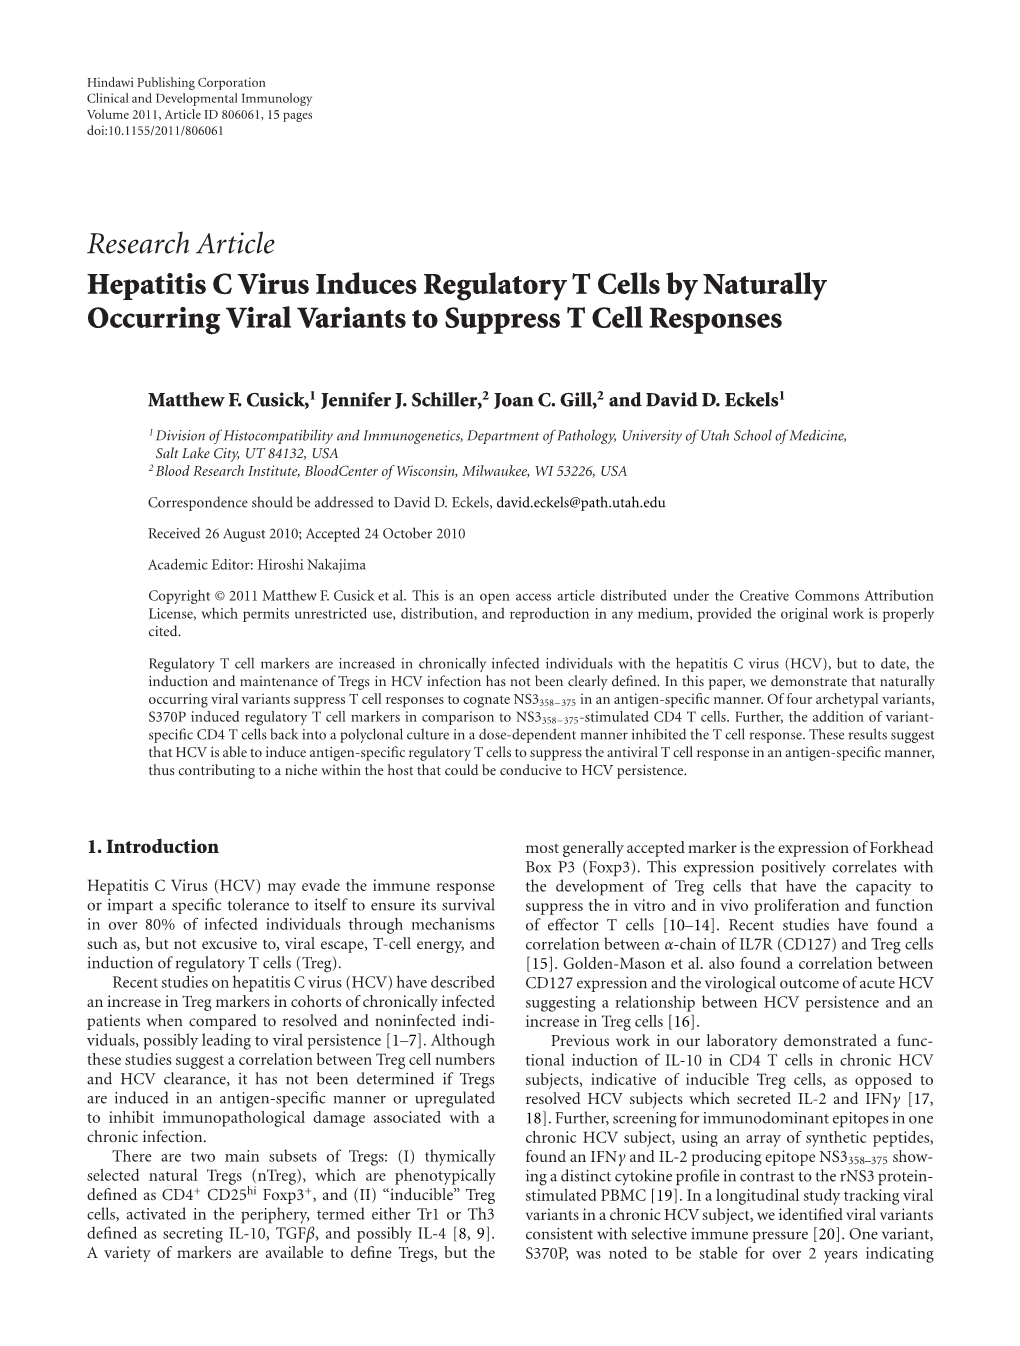 Hepatitis C Virus Induces Regulatory T Cells by Naturally Occurring Viral Variants to Suppress T Cell Responses